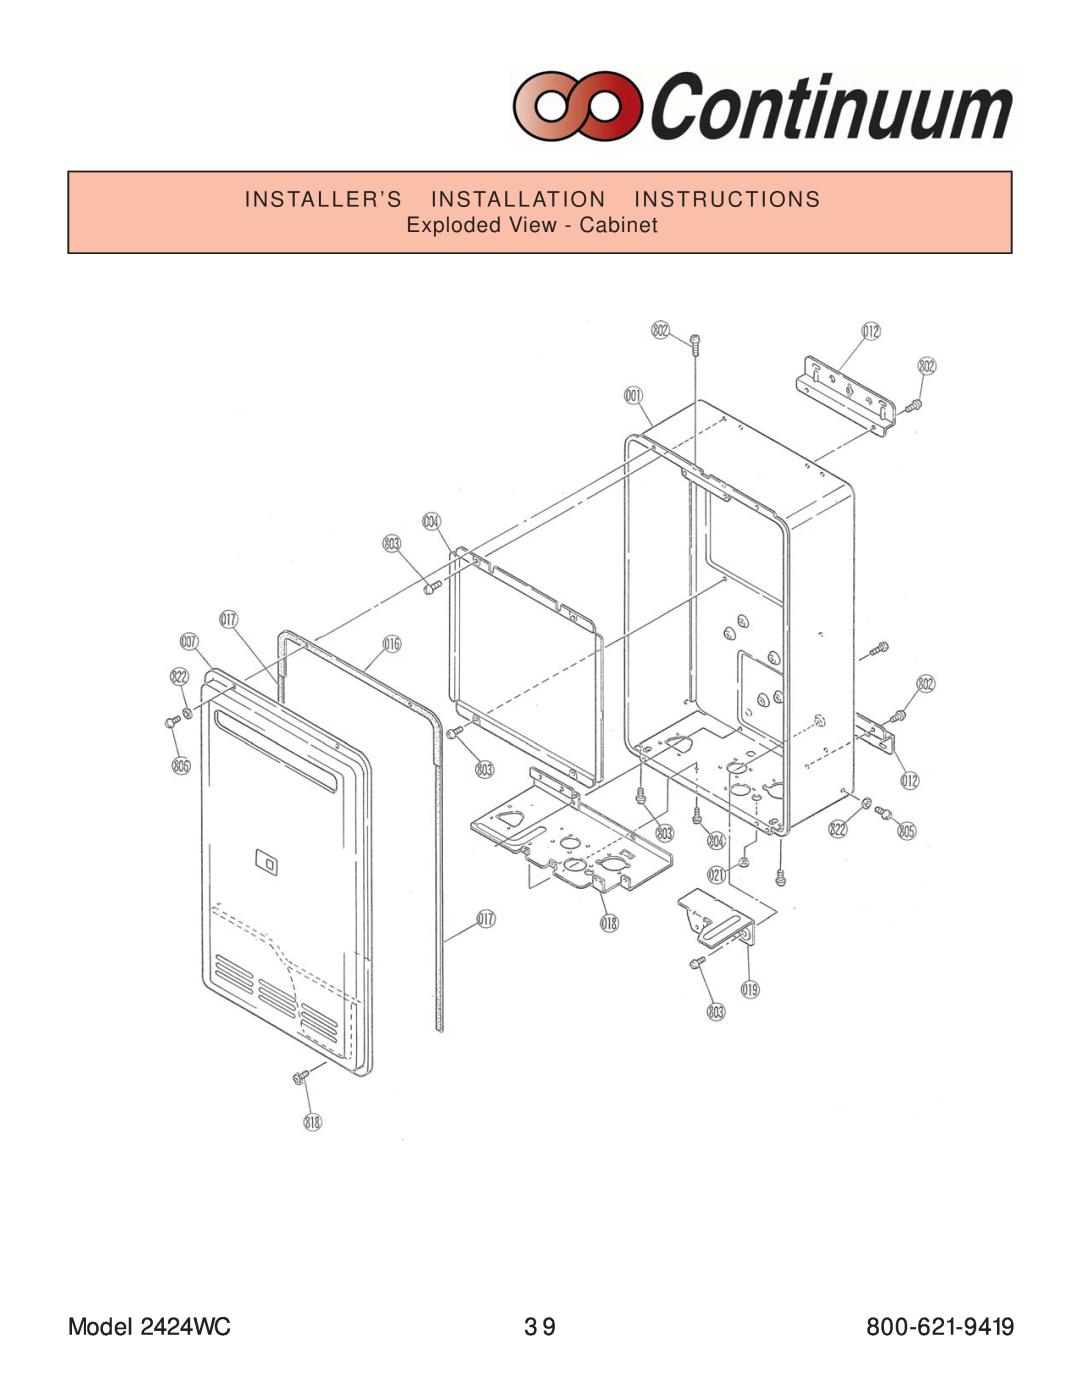 Rinnai manual Model 2424WC, Installer’S Installation Instructions, Exploded View - Cabinet 